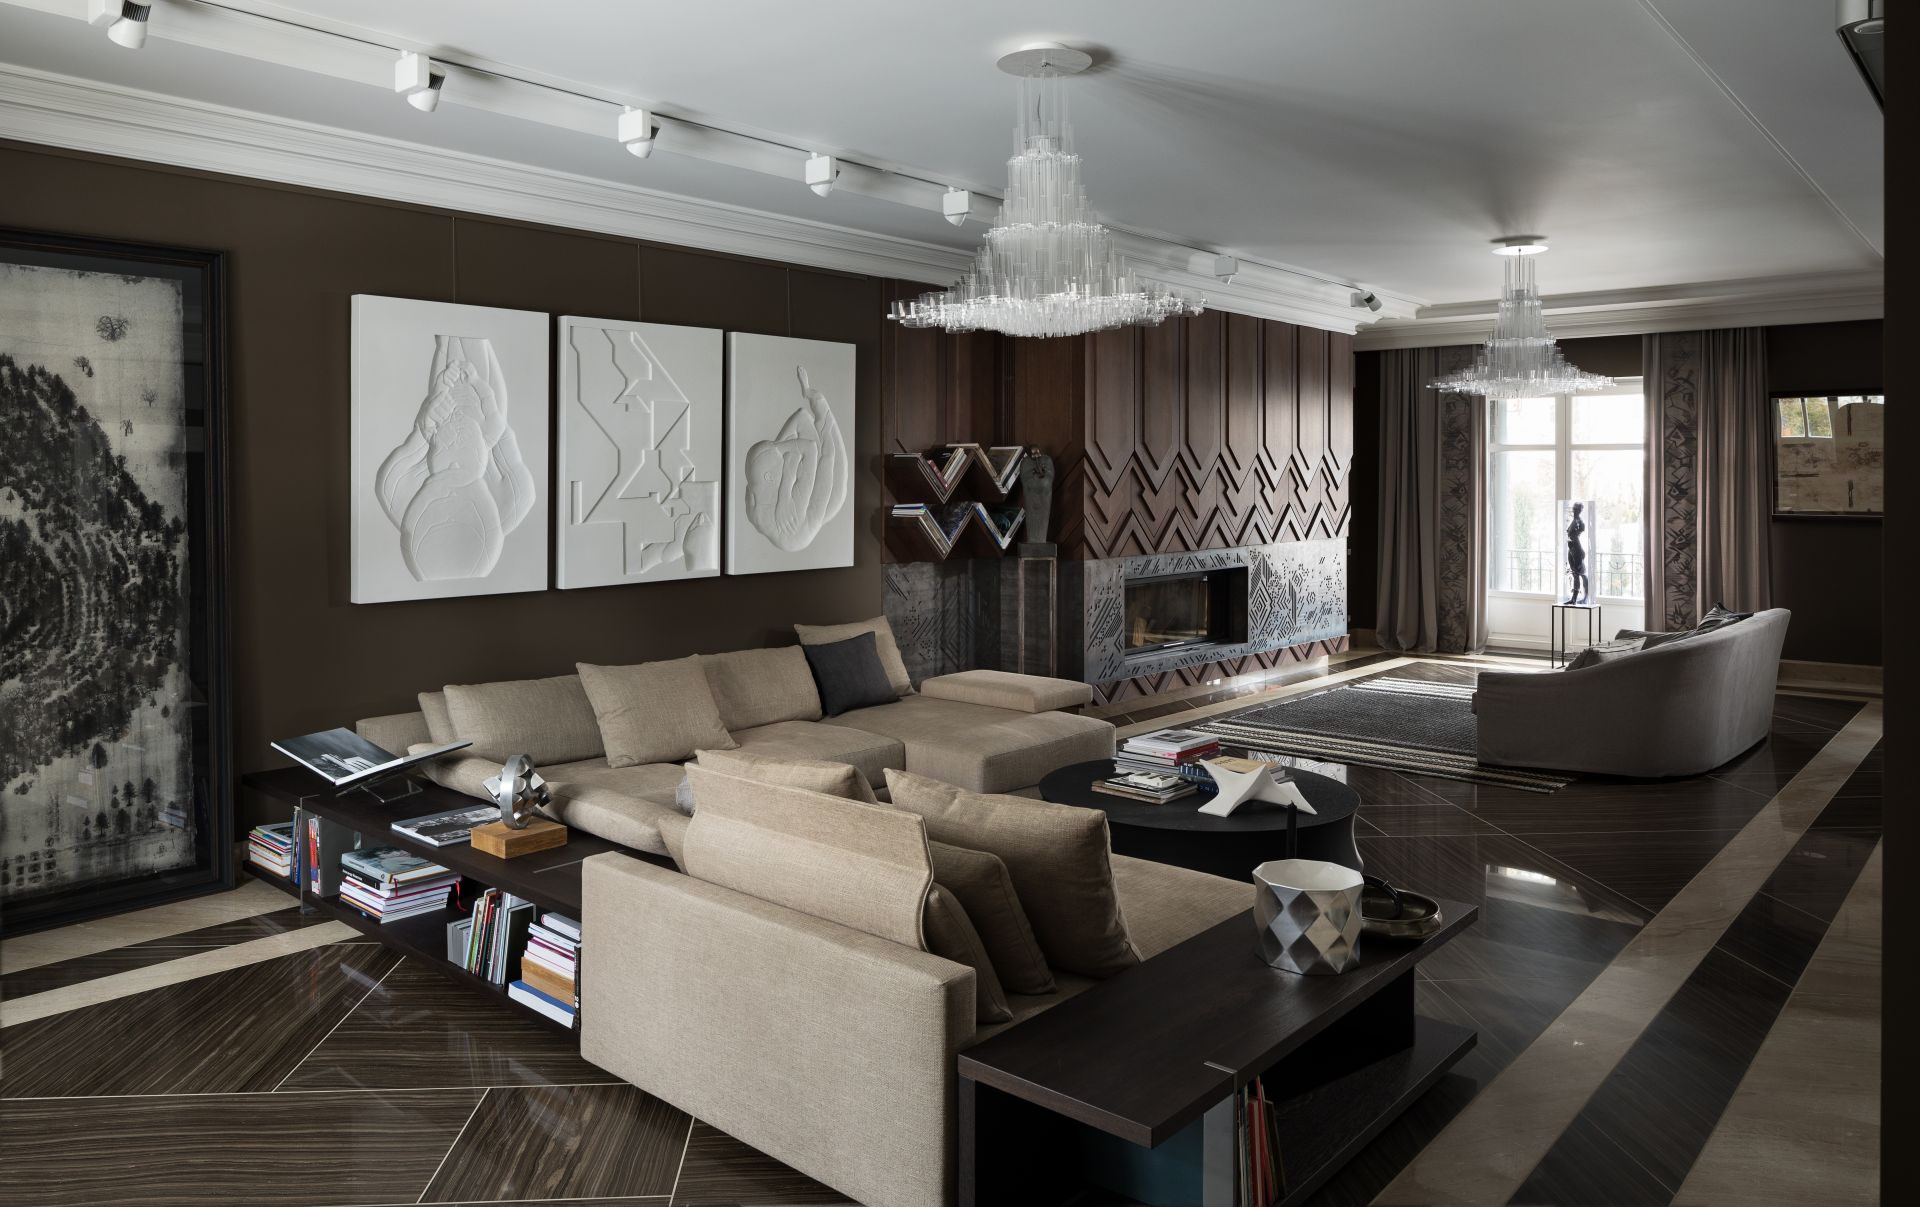 Wooden panels in a living room interior